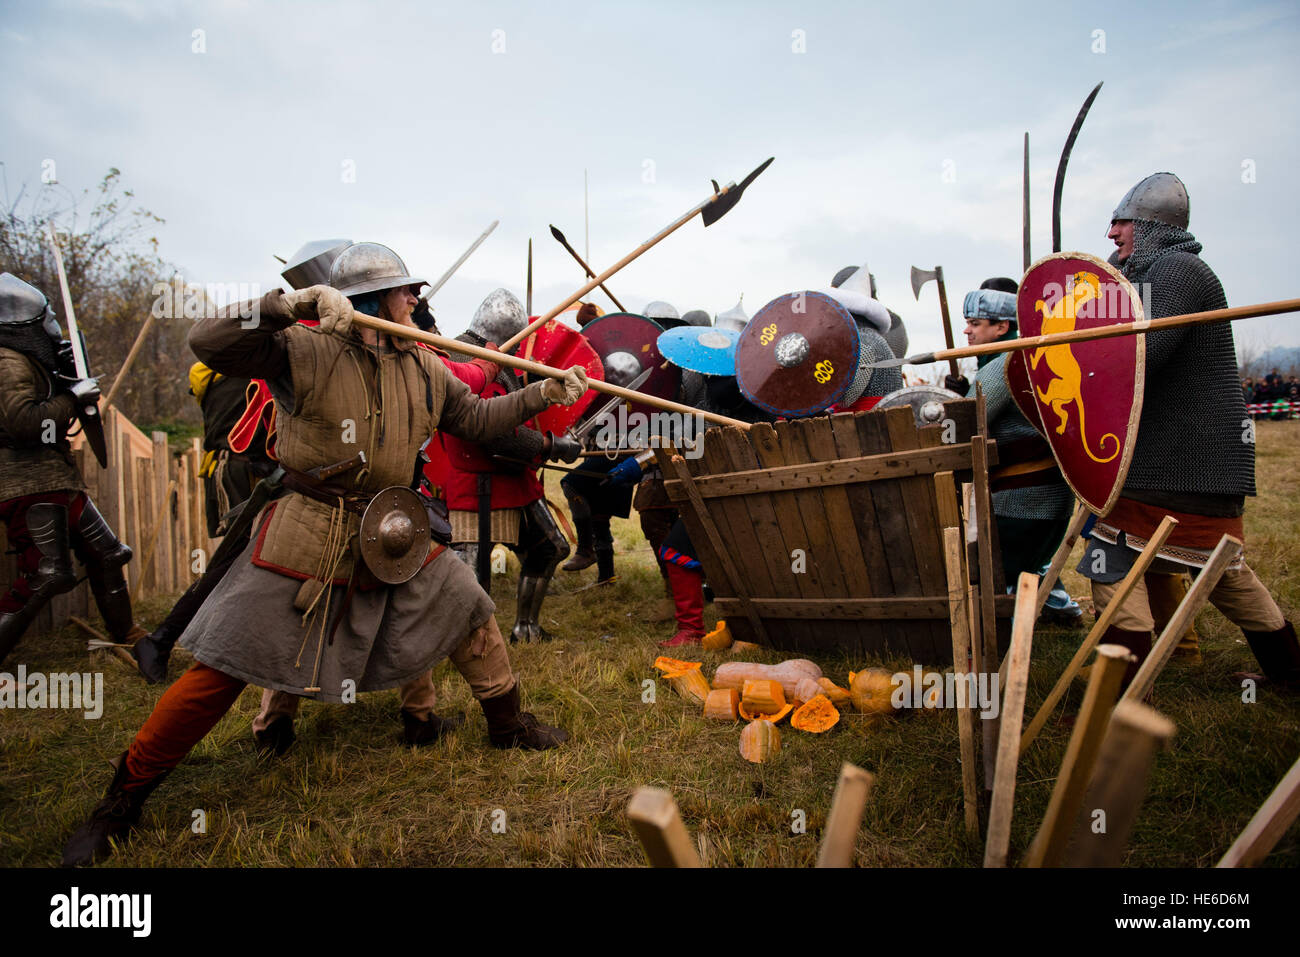 Bulgarian, Turkish, Czech, Hungarian and other countries amateur actors re-enact a scene from the battle of Polish King Wladyslaw III Warnenczyk against Ottoman Turks 572 years ago near the town of Varna, some 450 kilometers (260 miles) east of Sofia, Bulgaria on Saturday, Nov. 12, 2016. Wladislav III set out with a small army on a crusade against the Turks, but fell in a major battle in 1444 near Varna, Eastern Bulgaria where is his symbolic grave. The battle saw a ragtag christian army of mixed nationalities fighting against a force of Ottoman turks. About a hundred history enthusiasts and a Stock Photo